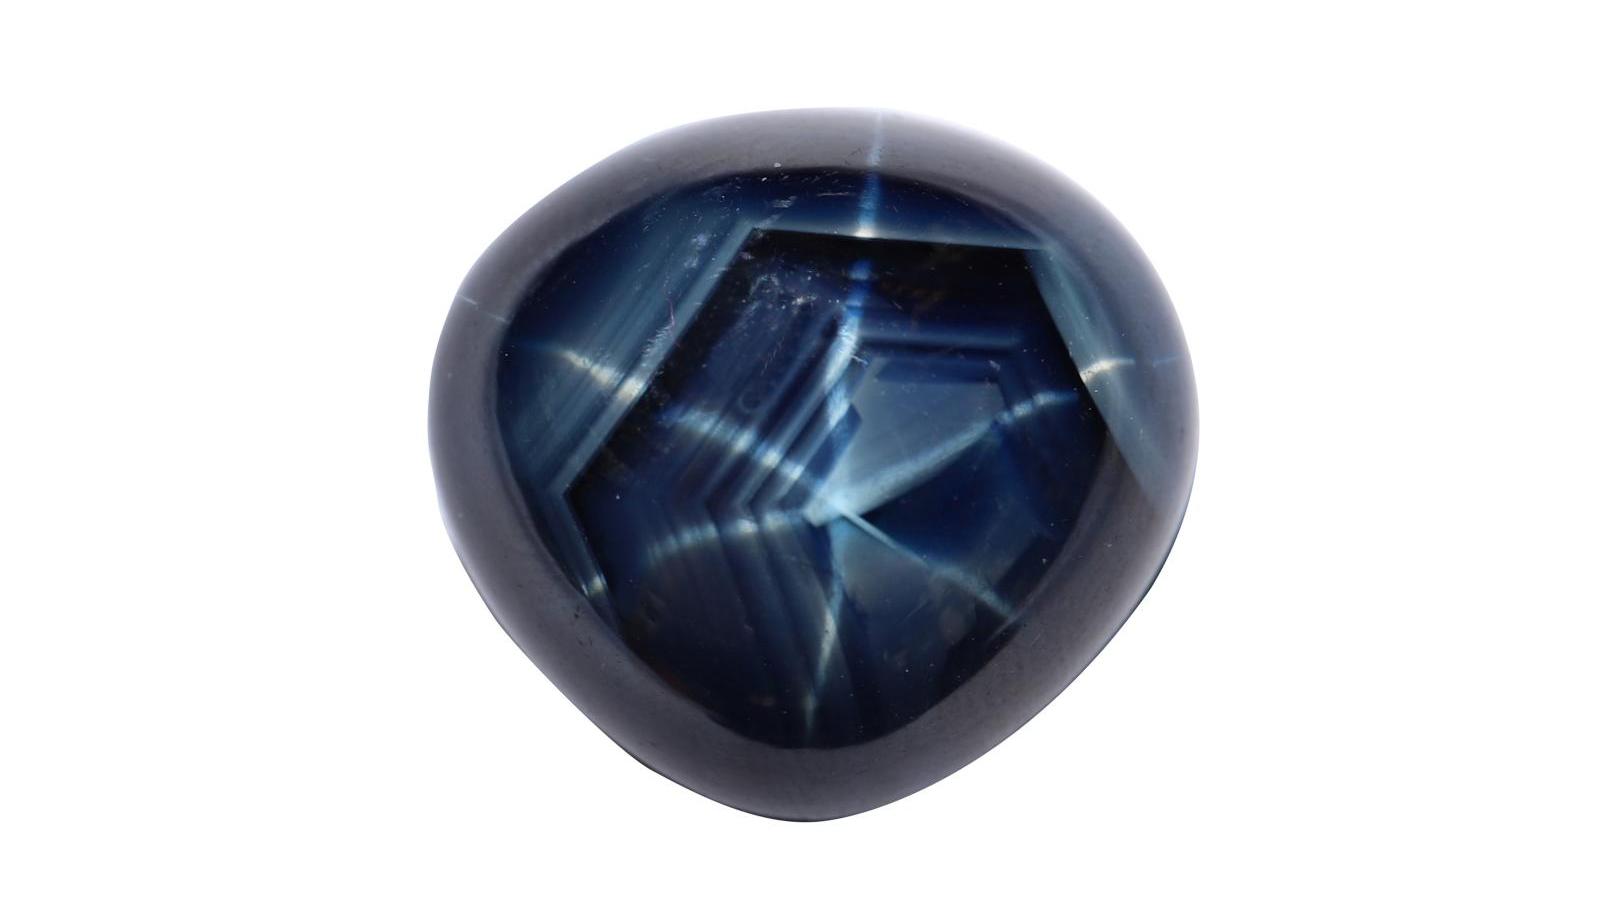 Blue star sapphire from Madagascar, 44 carats, 74, natural, unheated, triangular... Aim for the Stars!